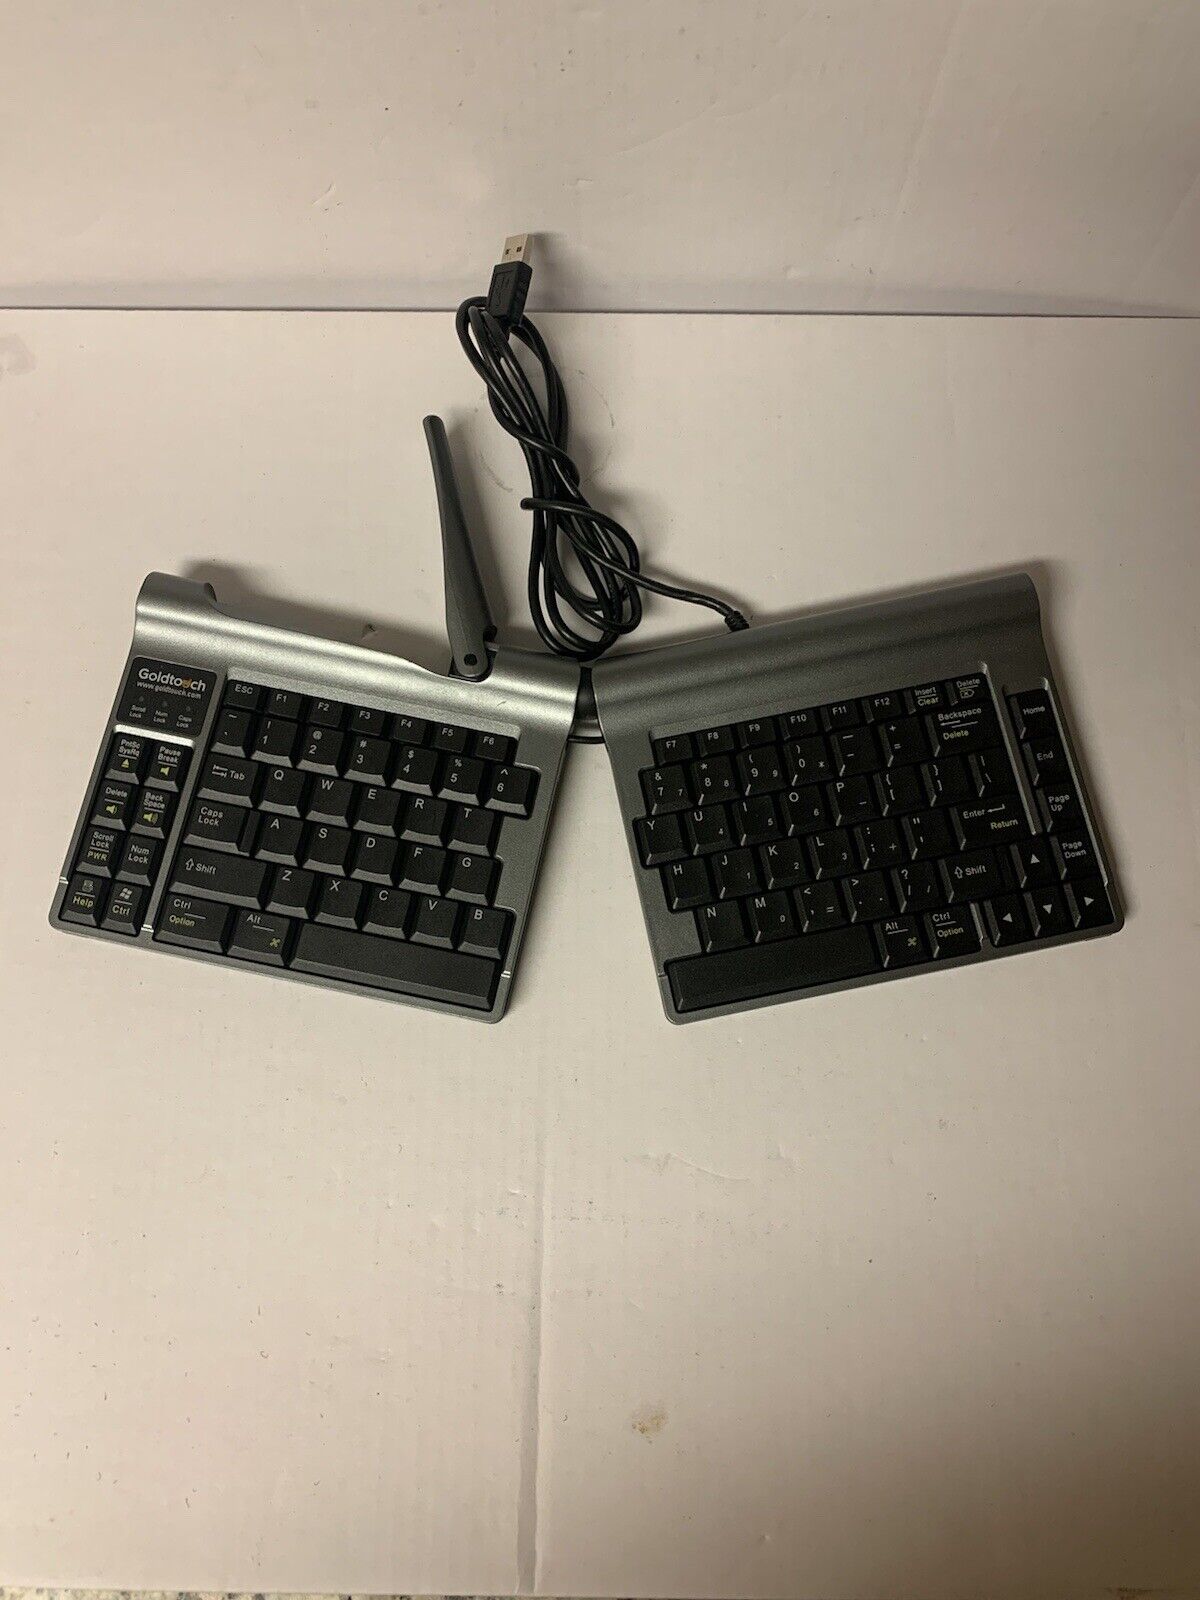 GoldTouch Keyboard GTP-0055 Portable Split Ergonomic USB PC SKS-4210UH - TESTED